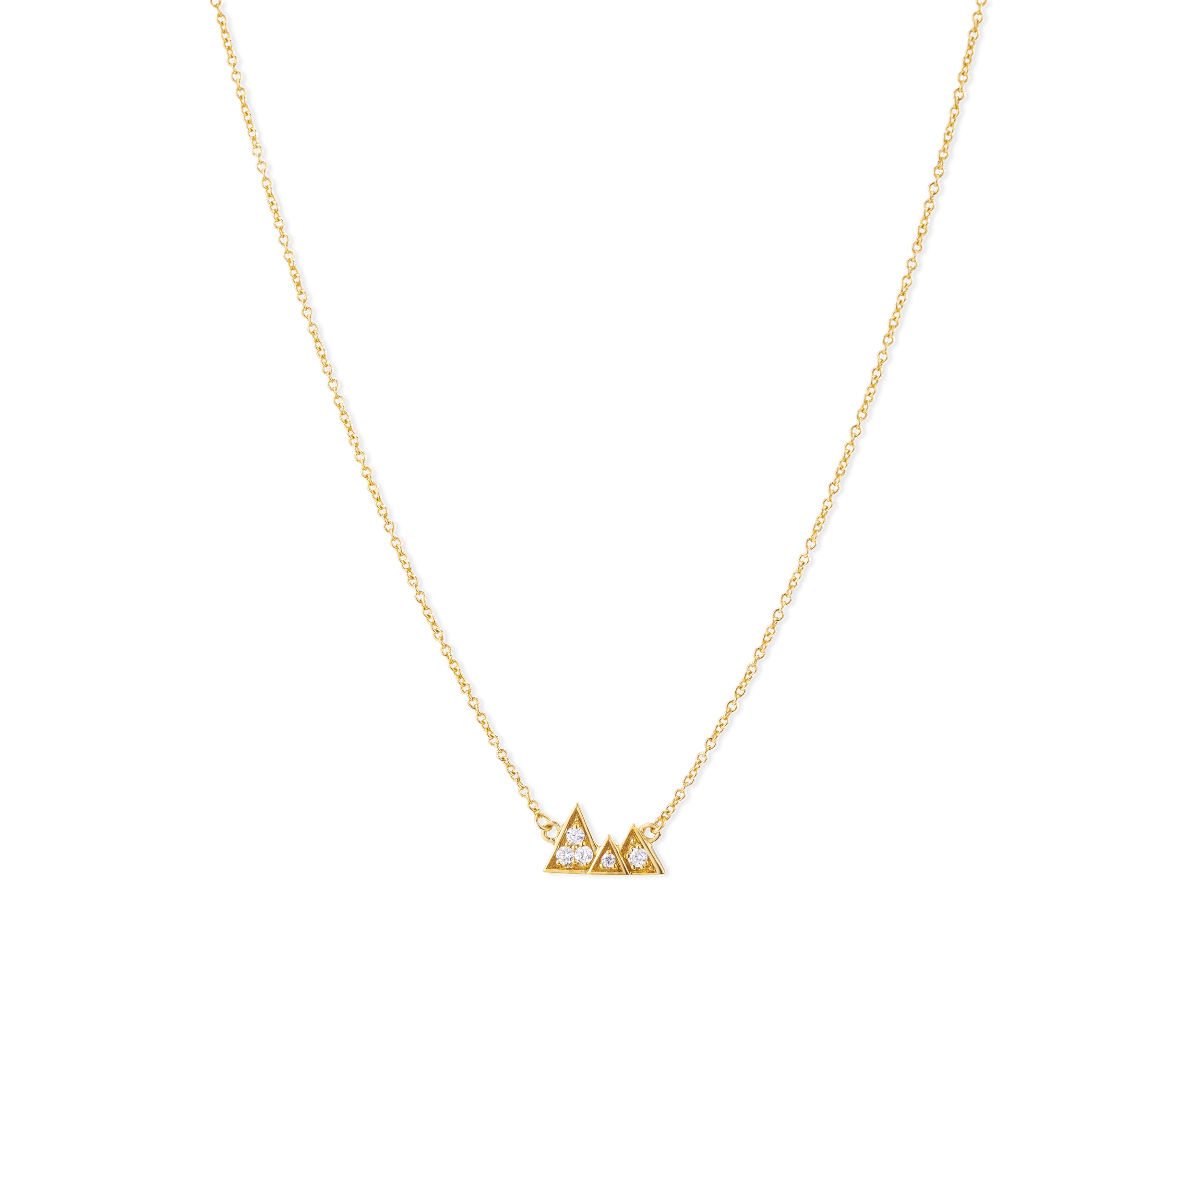 Achieve The Impossible Necklace